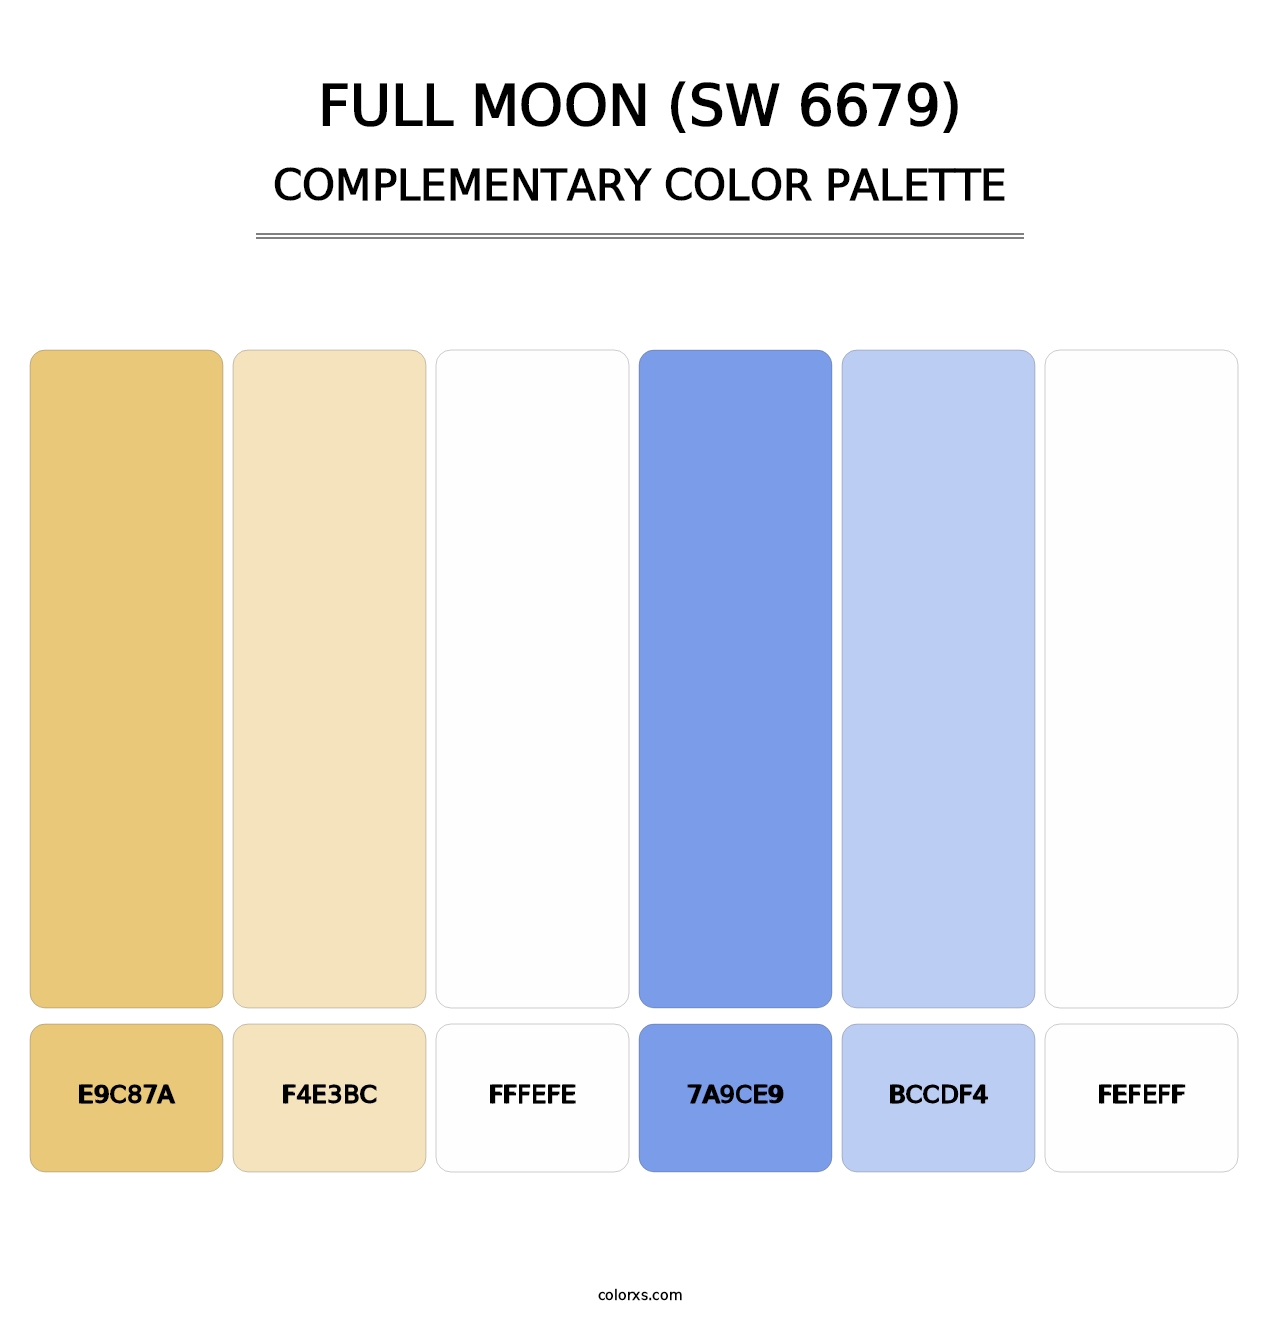 Full Moon (SW 6679) - Complementary Color Palette